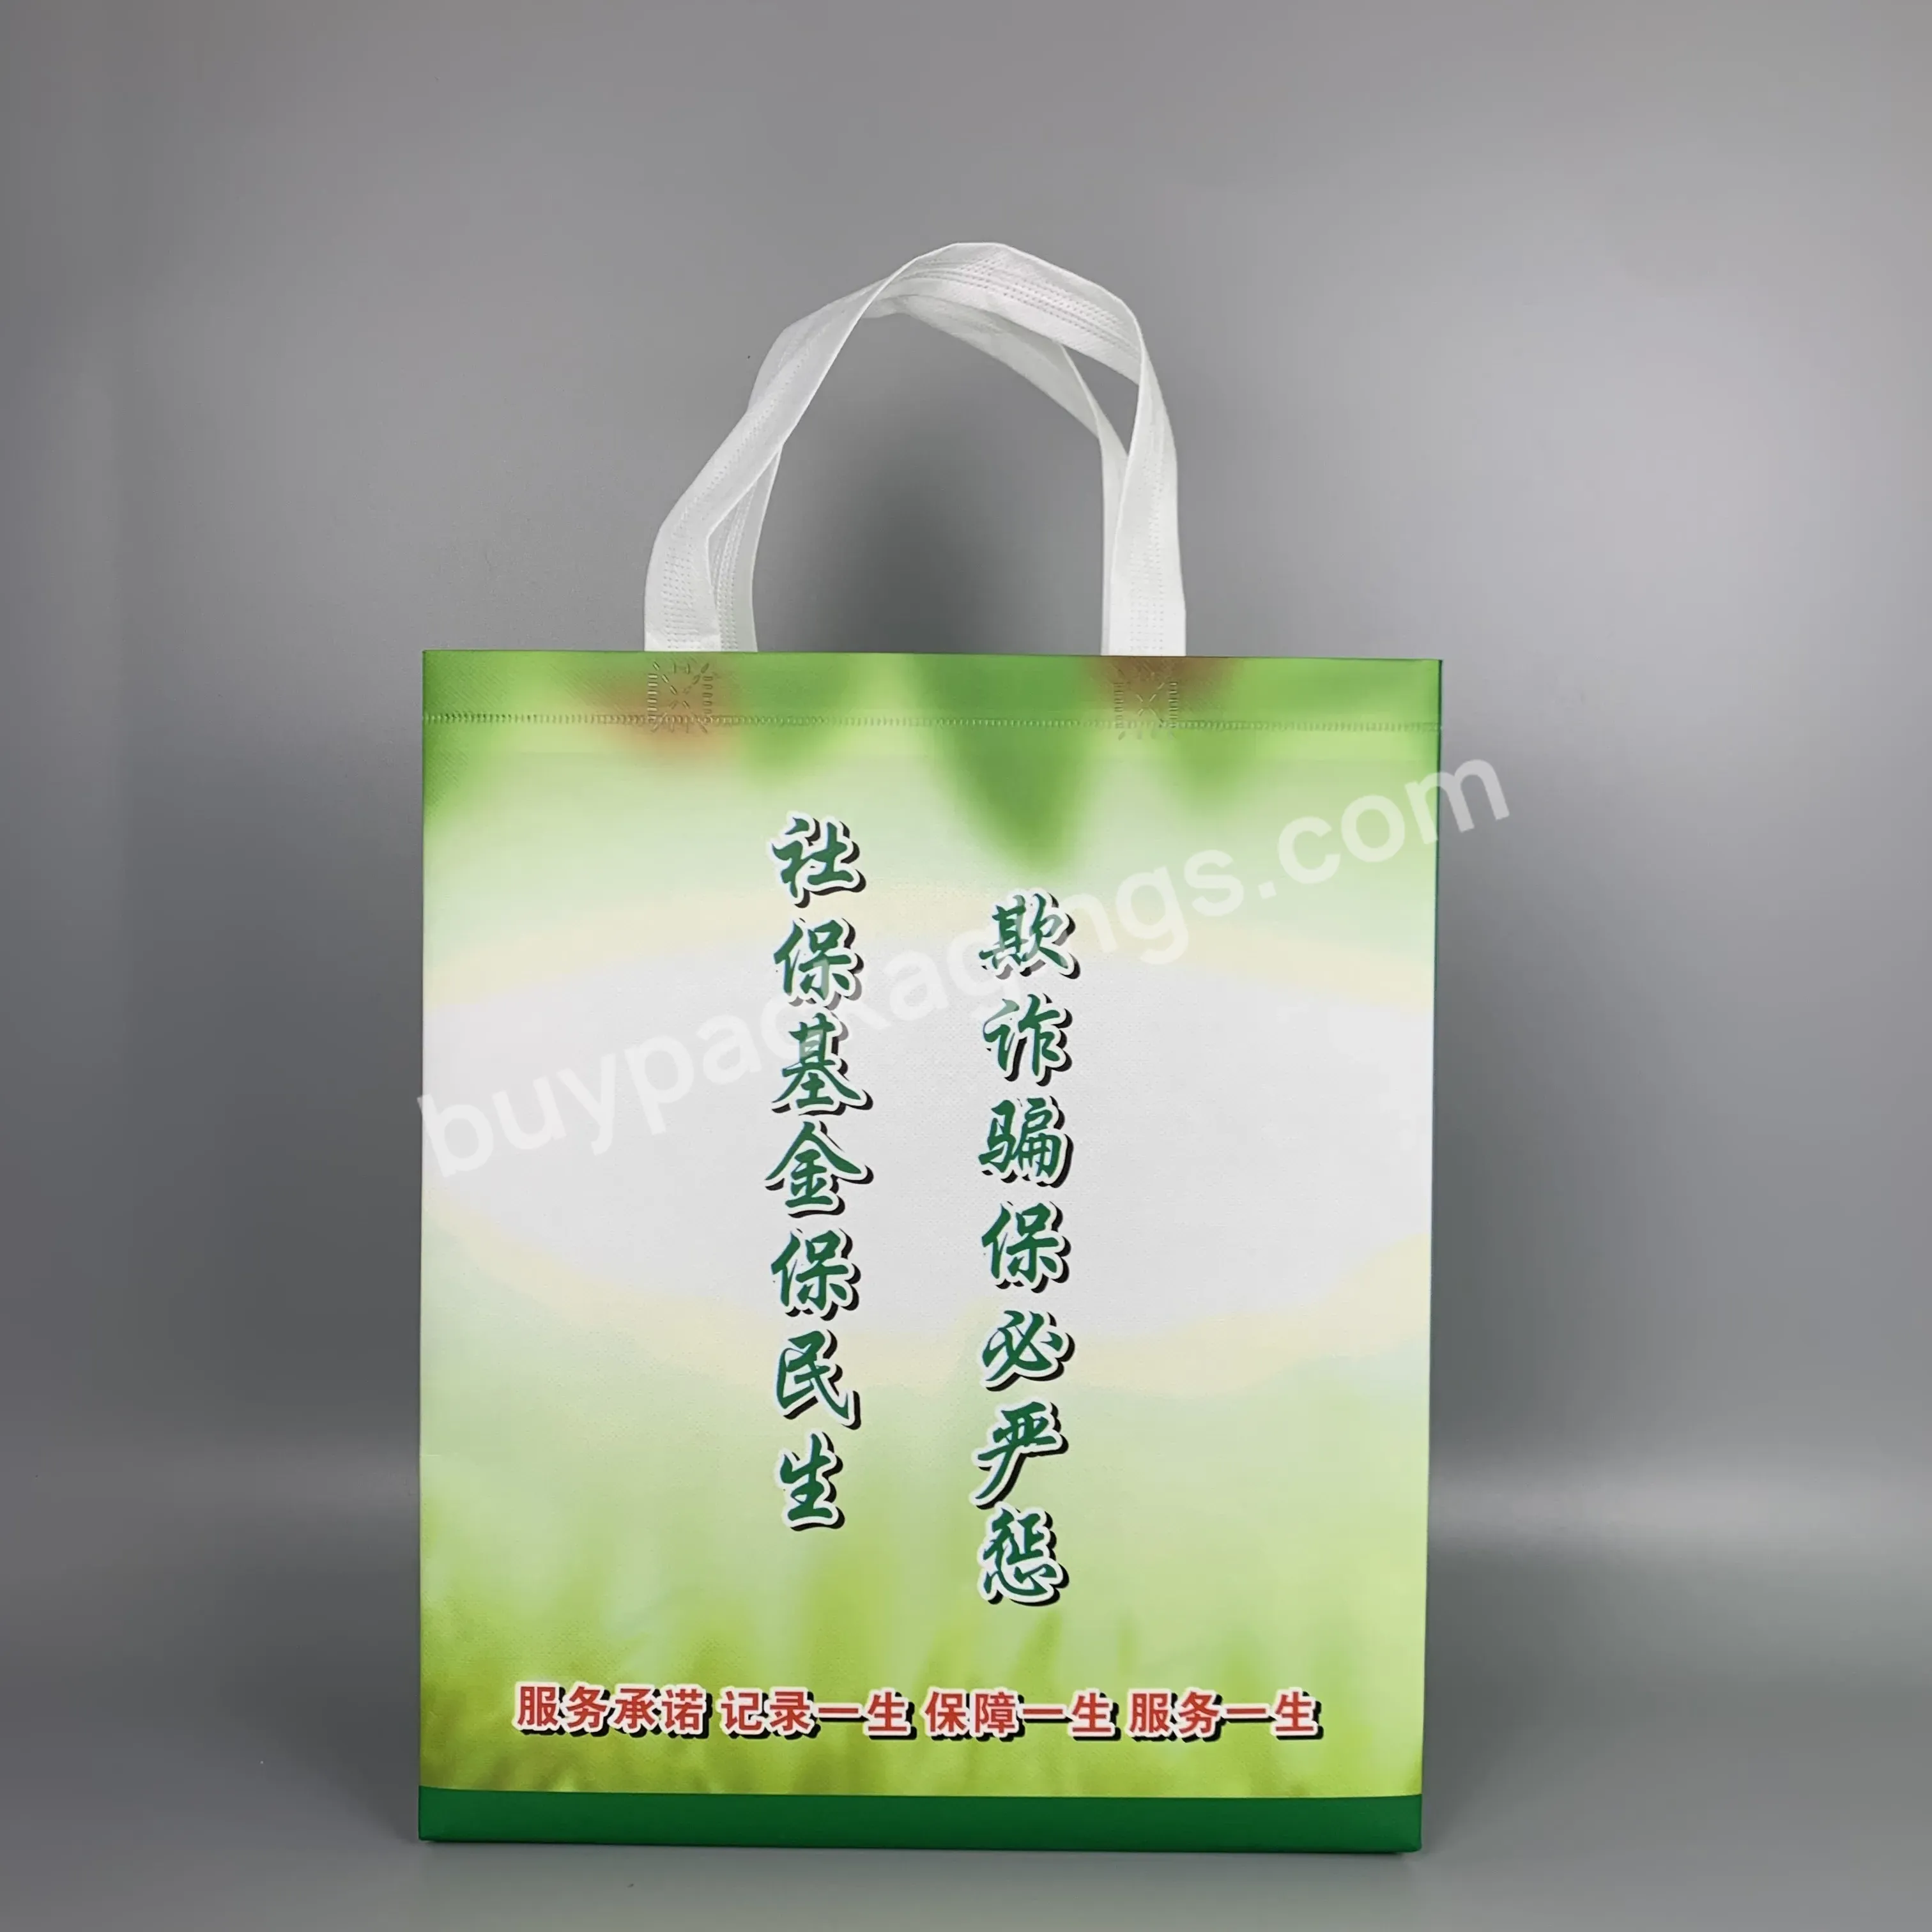 Whole Sale Tough Recyclable Ecological Biodegradable Waterproof Non Woven Bag With Handle